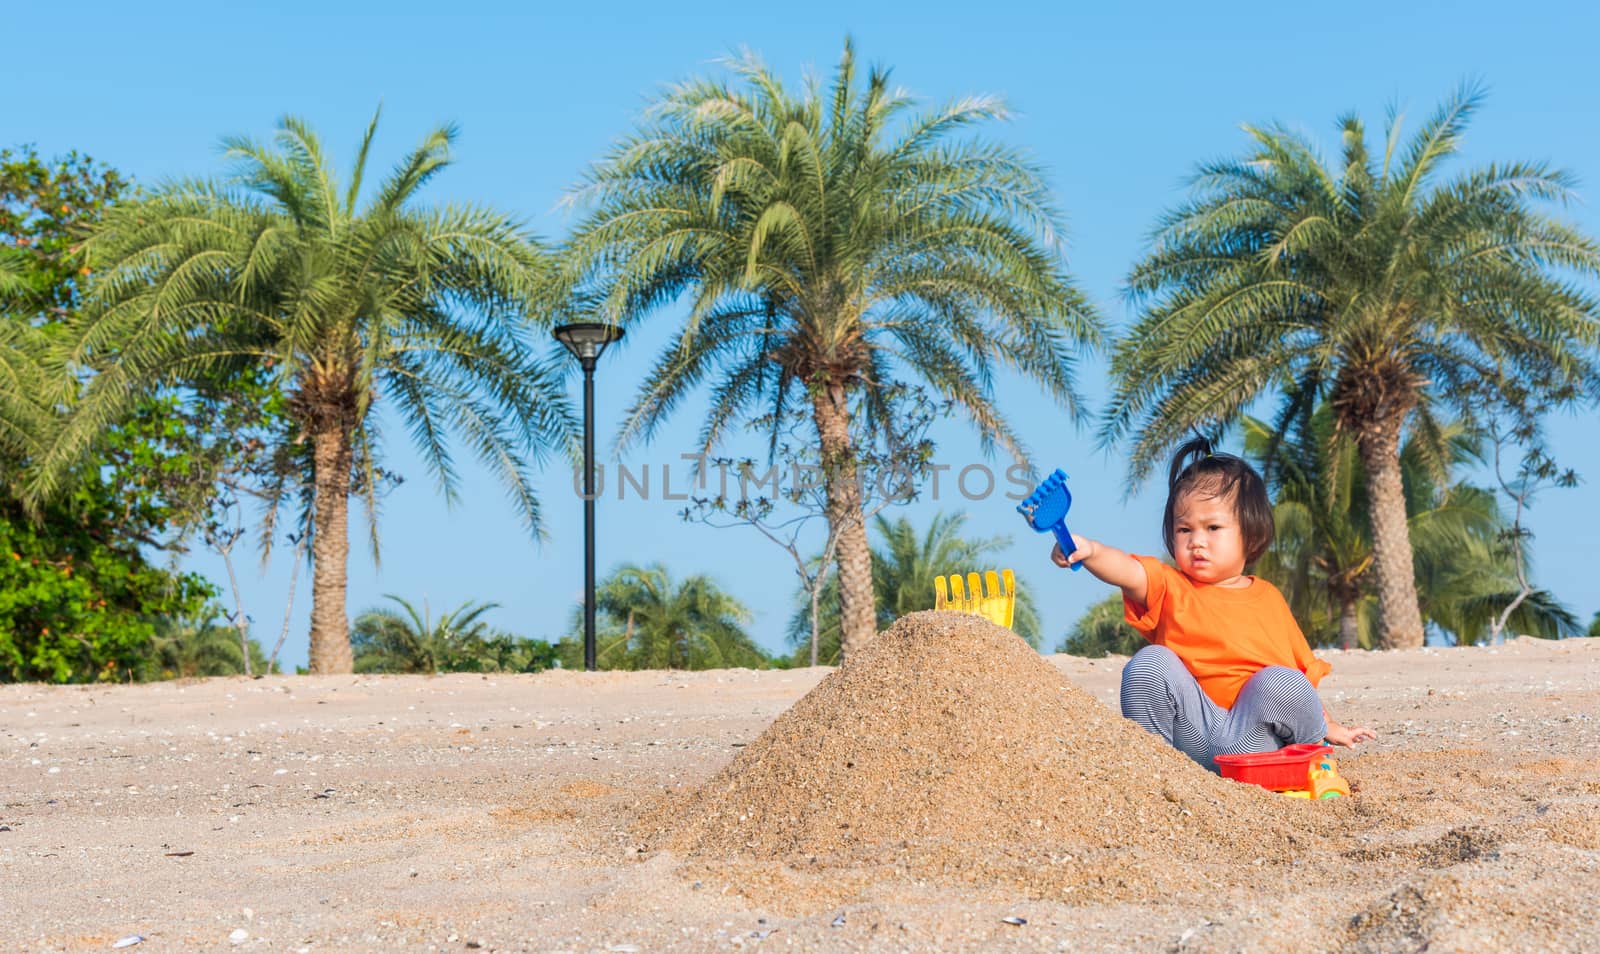 cheerful daughter girl funny digging playing toy with sand by Sorapop